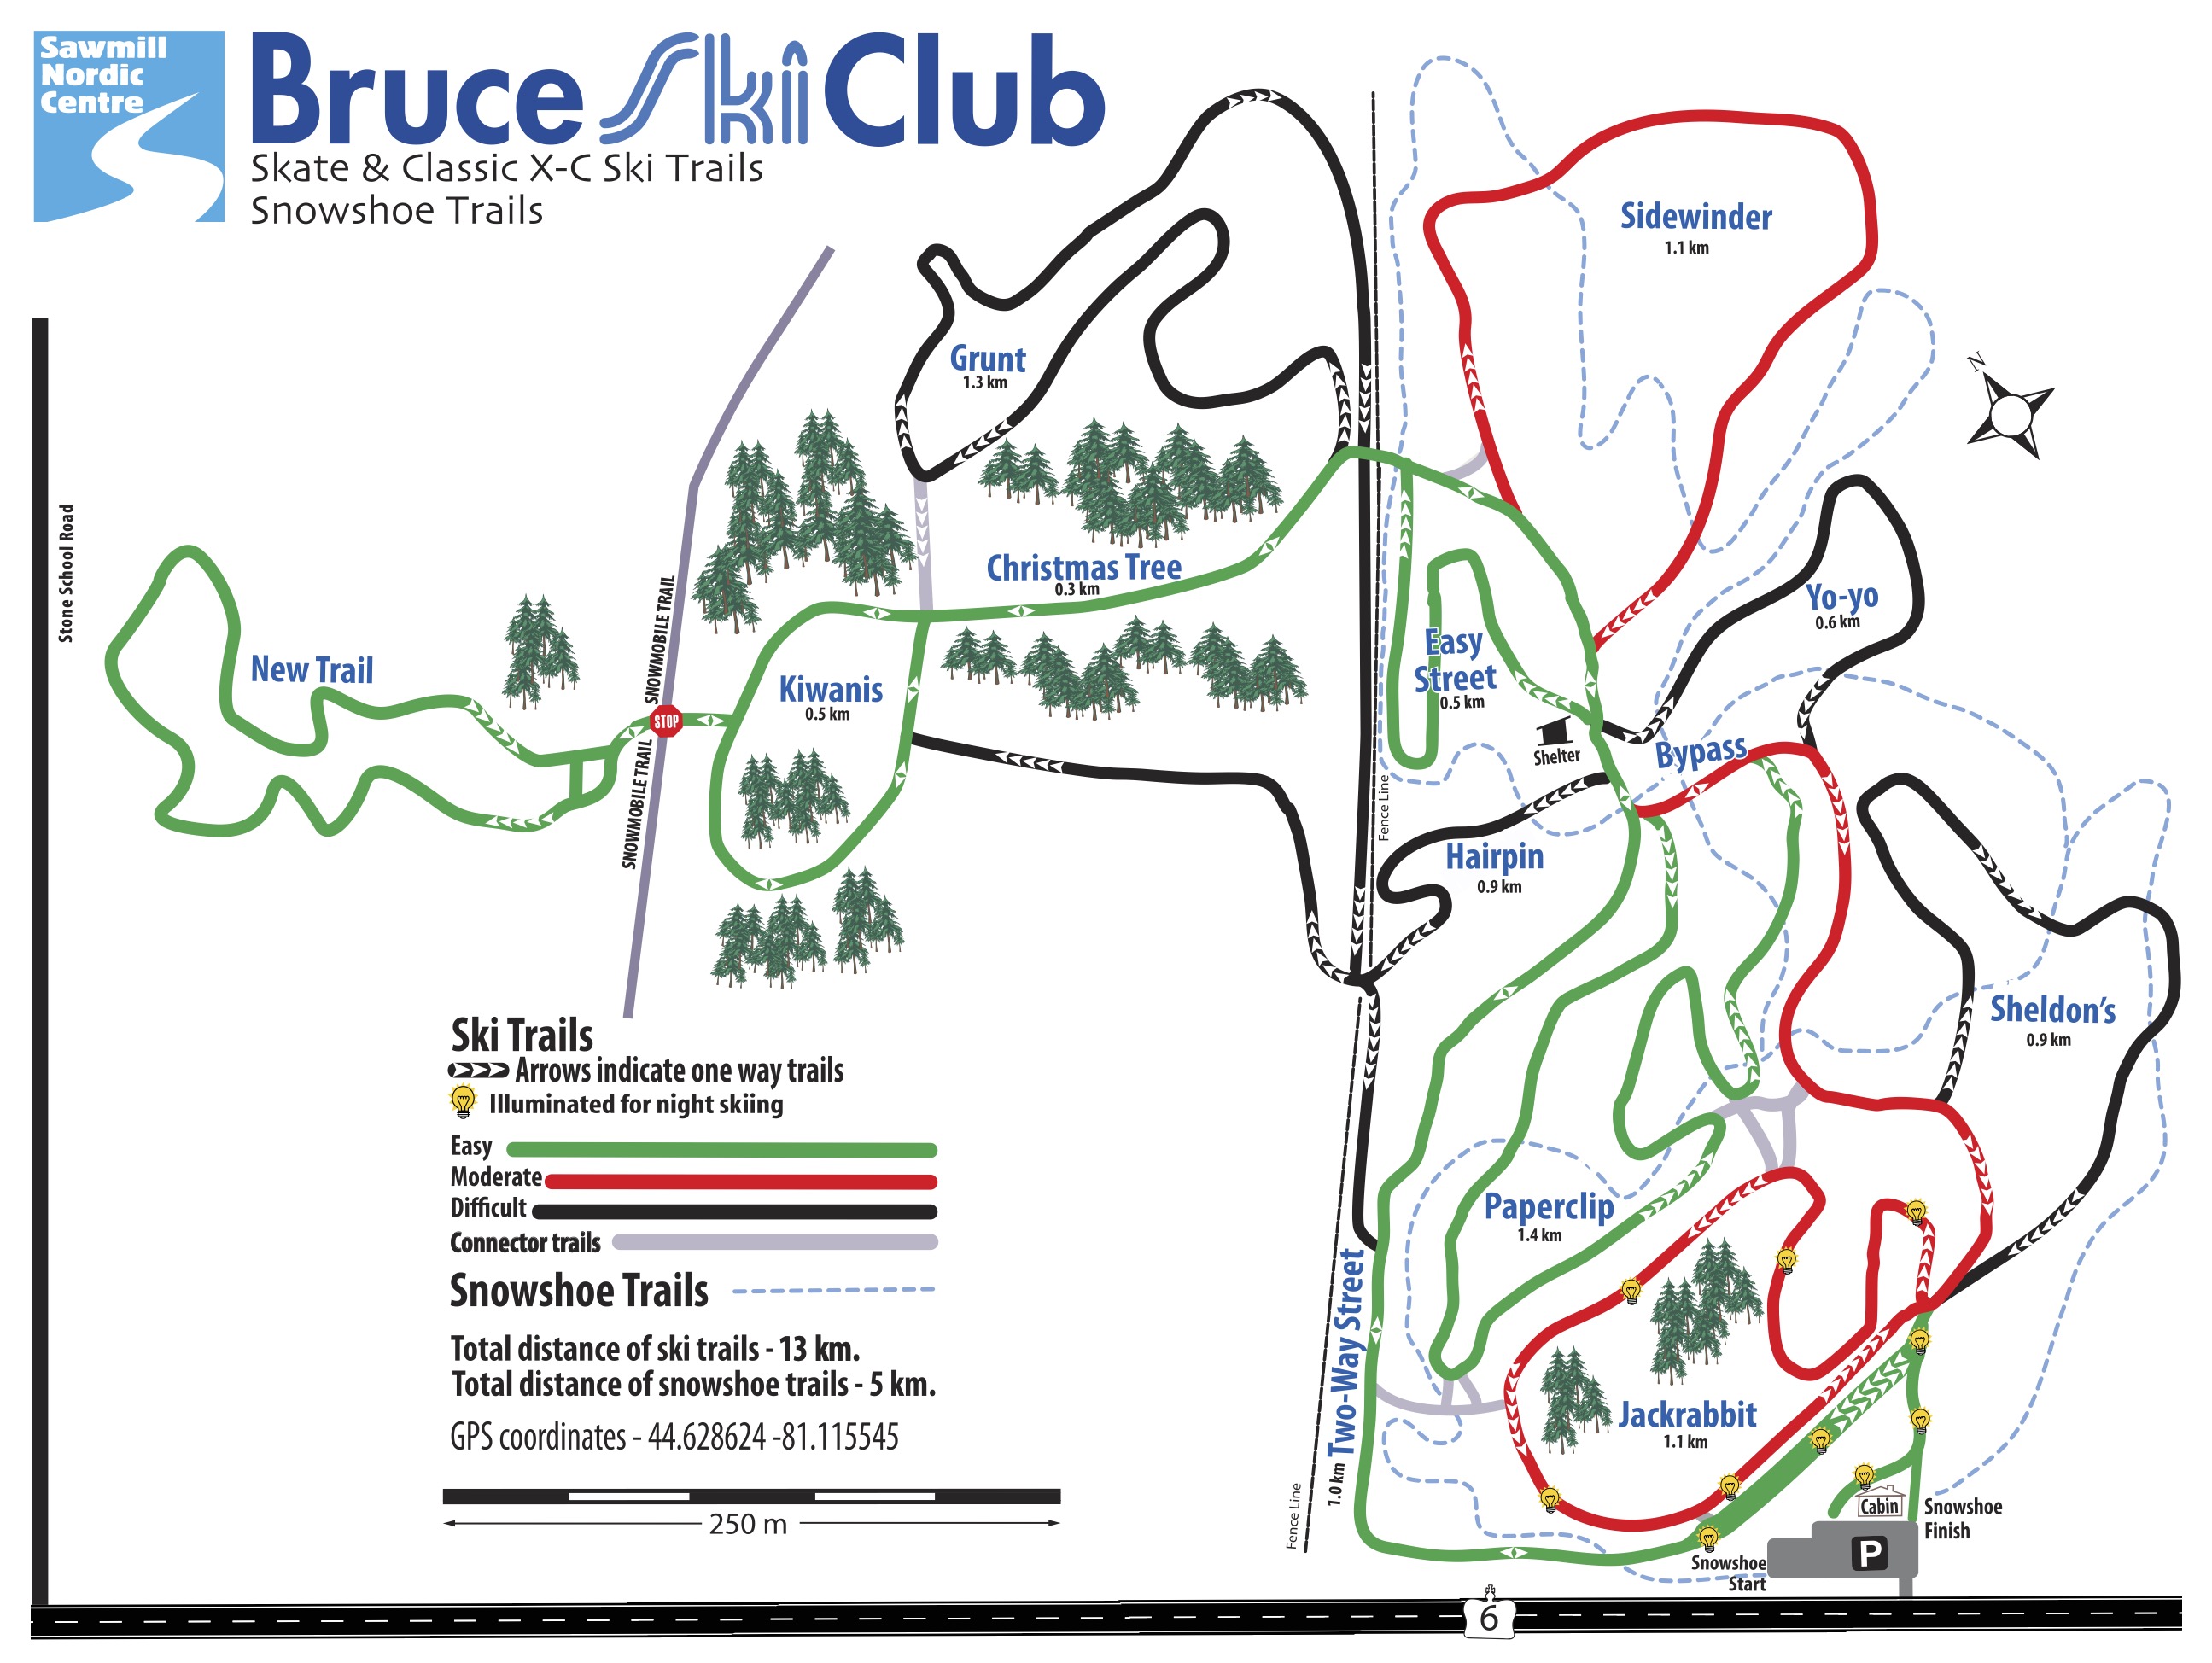 Sawmill Nordic Centre – Cross-country ski and snowshoe trails map (revised 10/24/23)